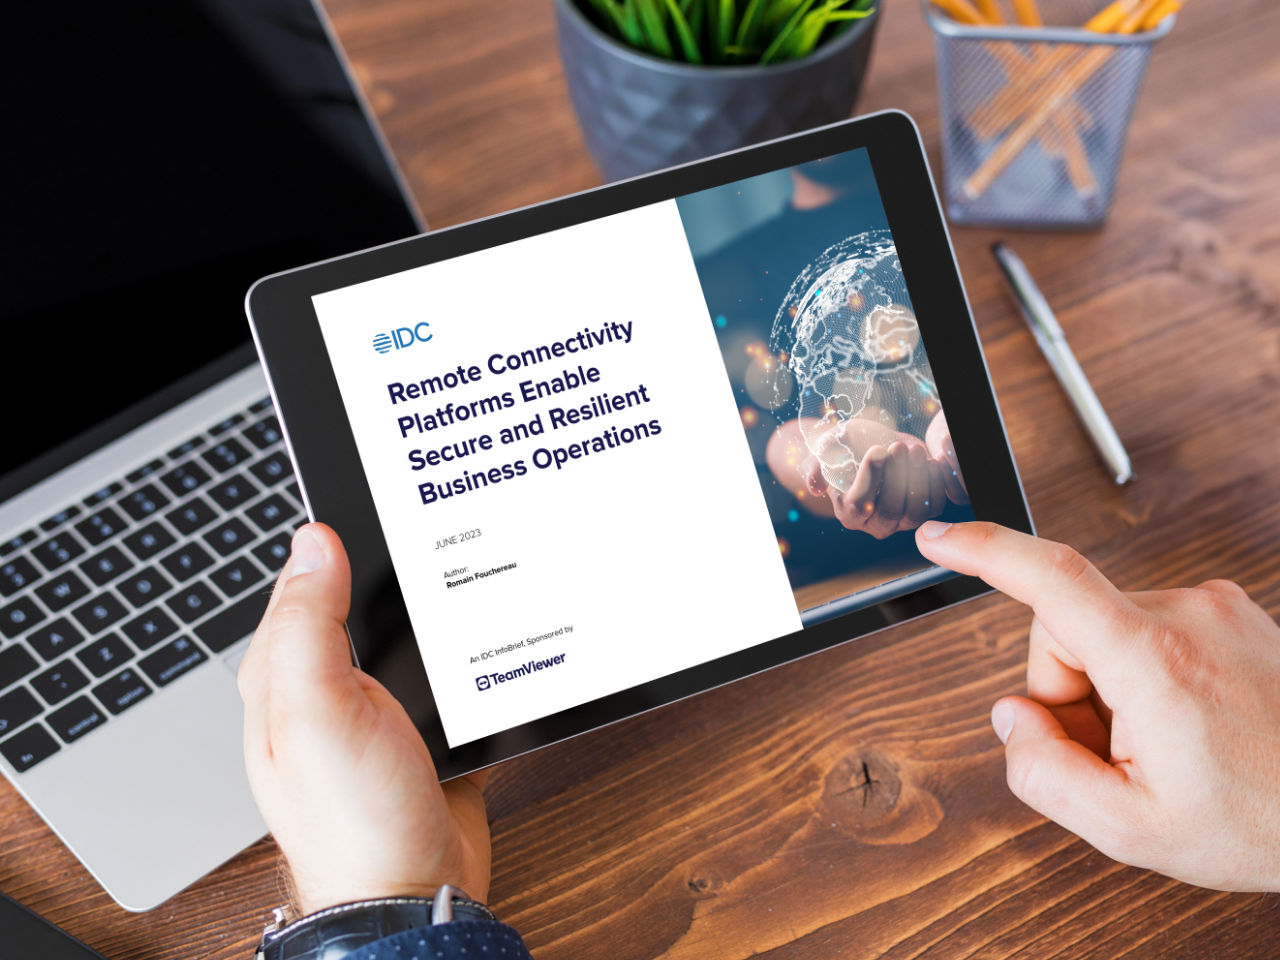 Preview of the "Remote connectivity platforms enable secure and resilient business operations" Info Brief